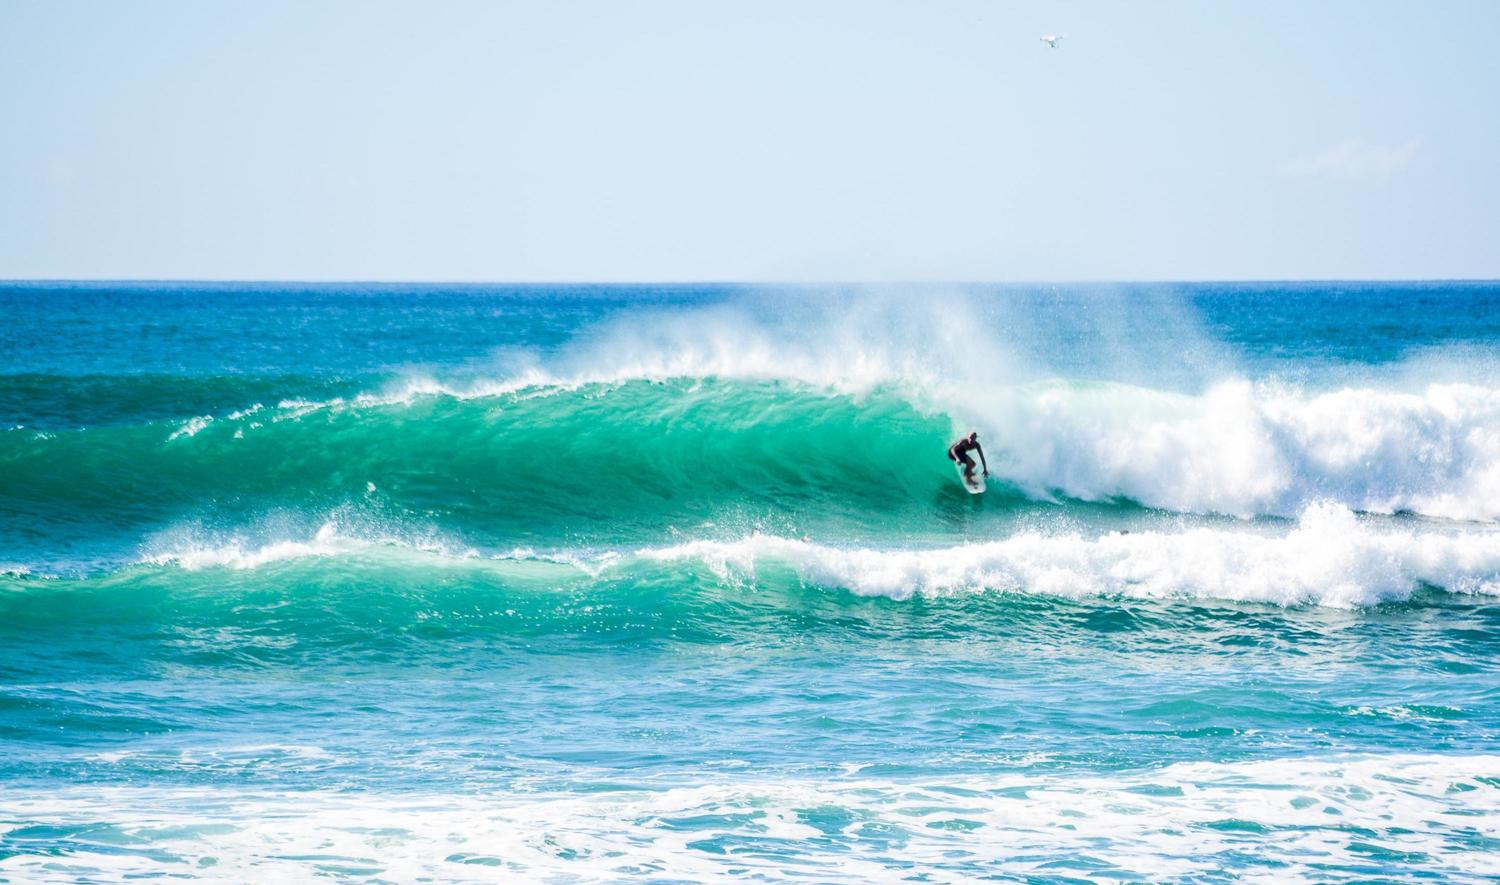 What are the reasons behind taking surfing lessons in Cabo San Lucas?